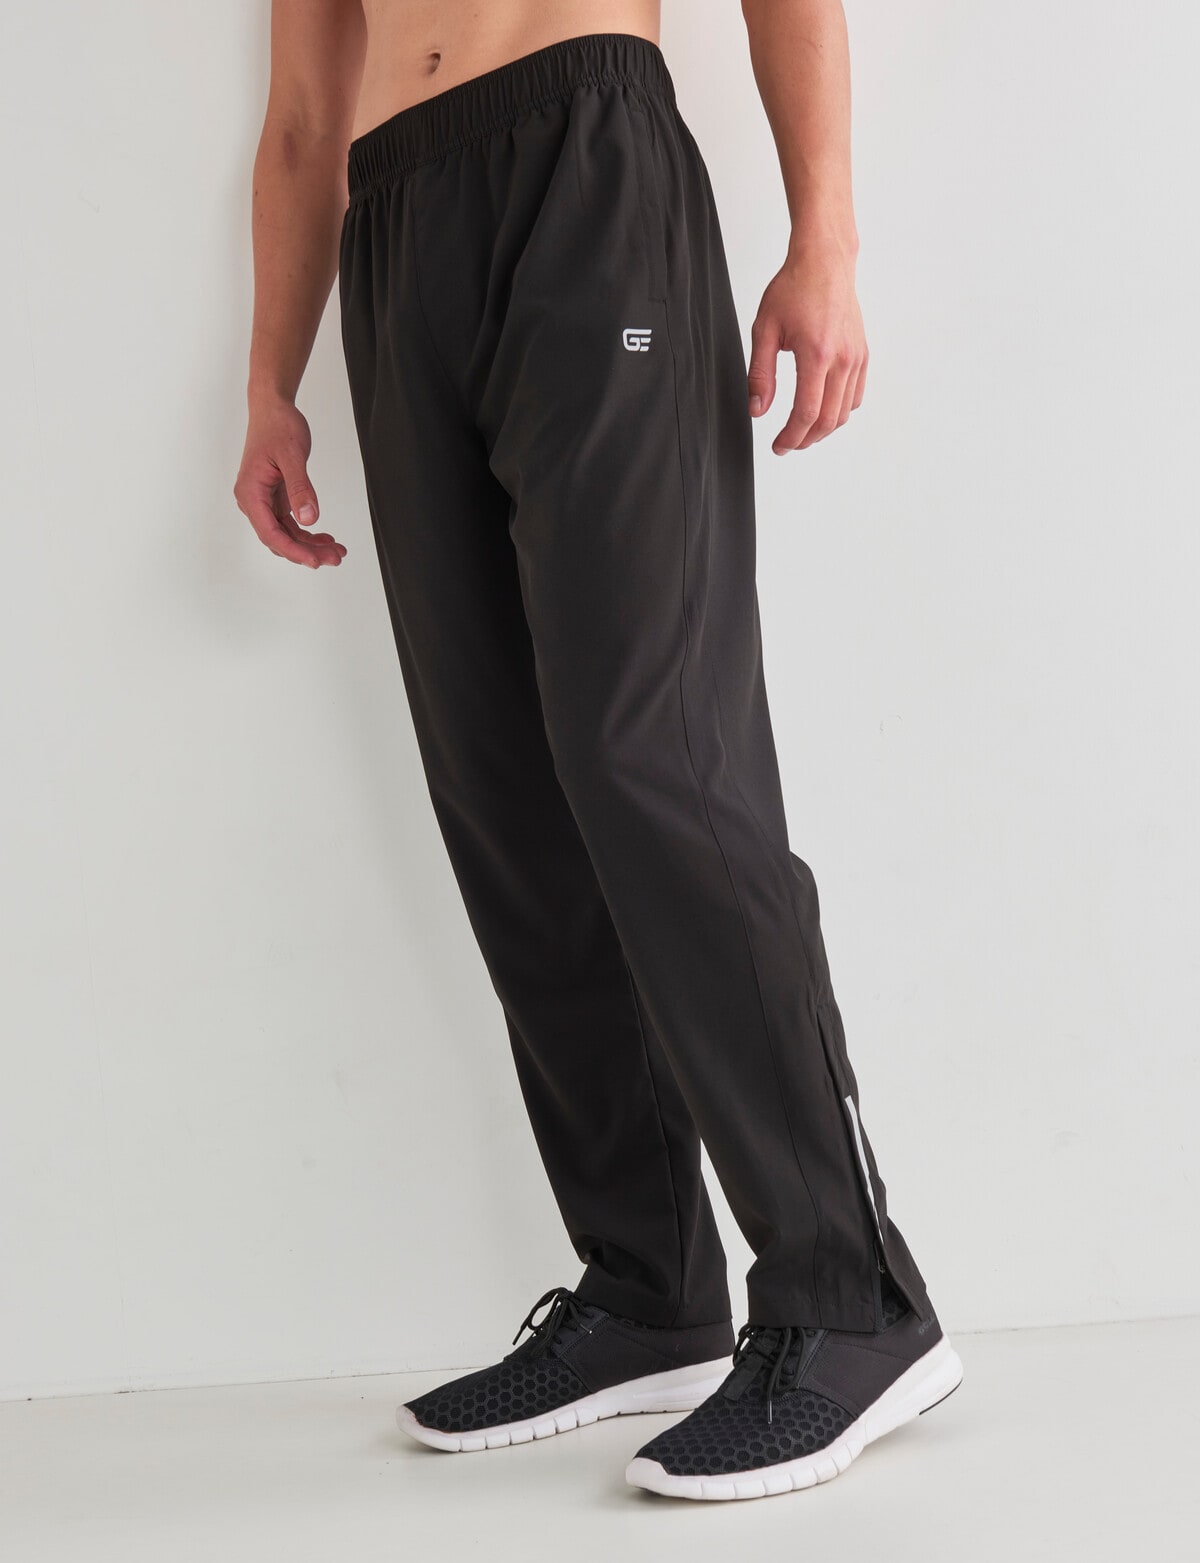 Gym Equipment Tapered Microfibre Training Pants, Black - Activewear